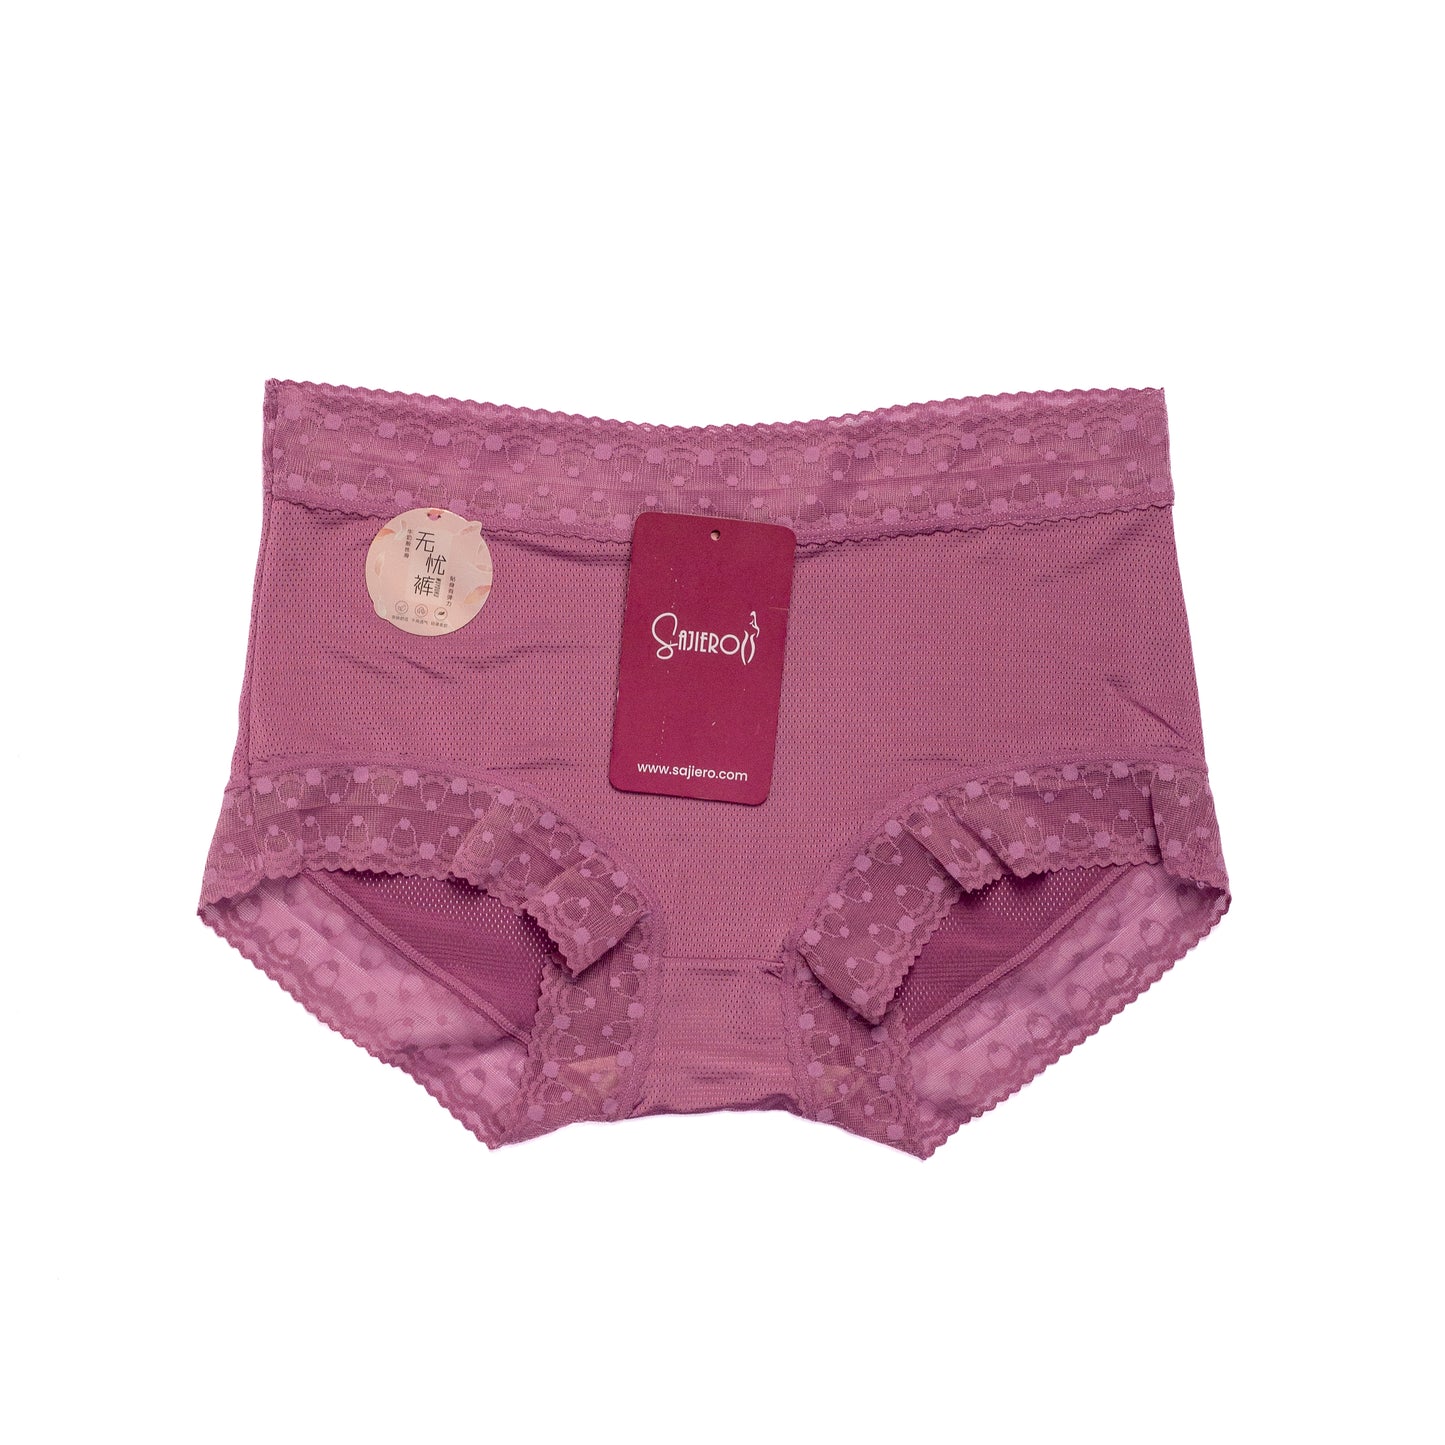 TCC Embroidery Net Brief Cotton Panty